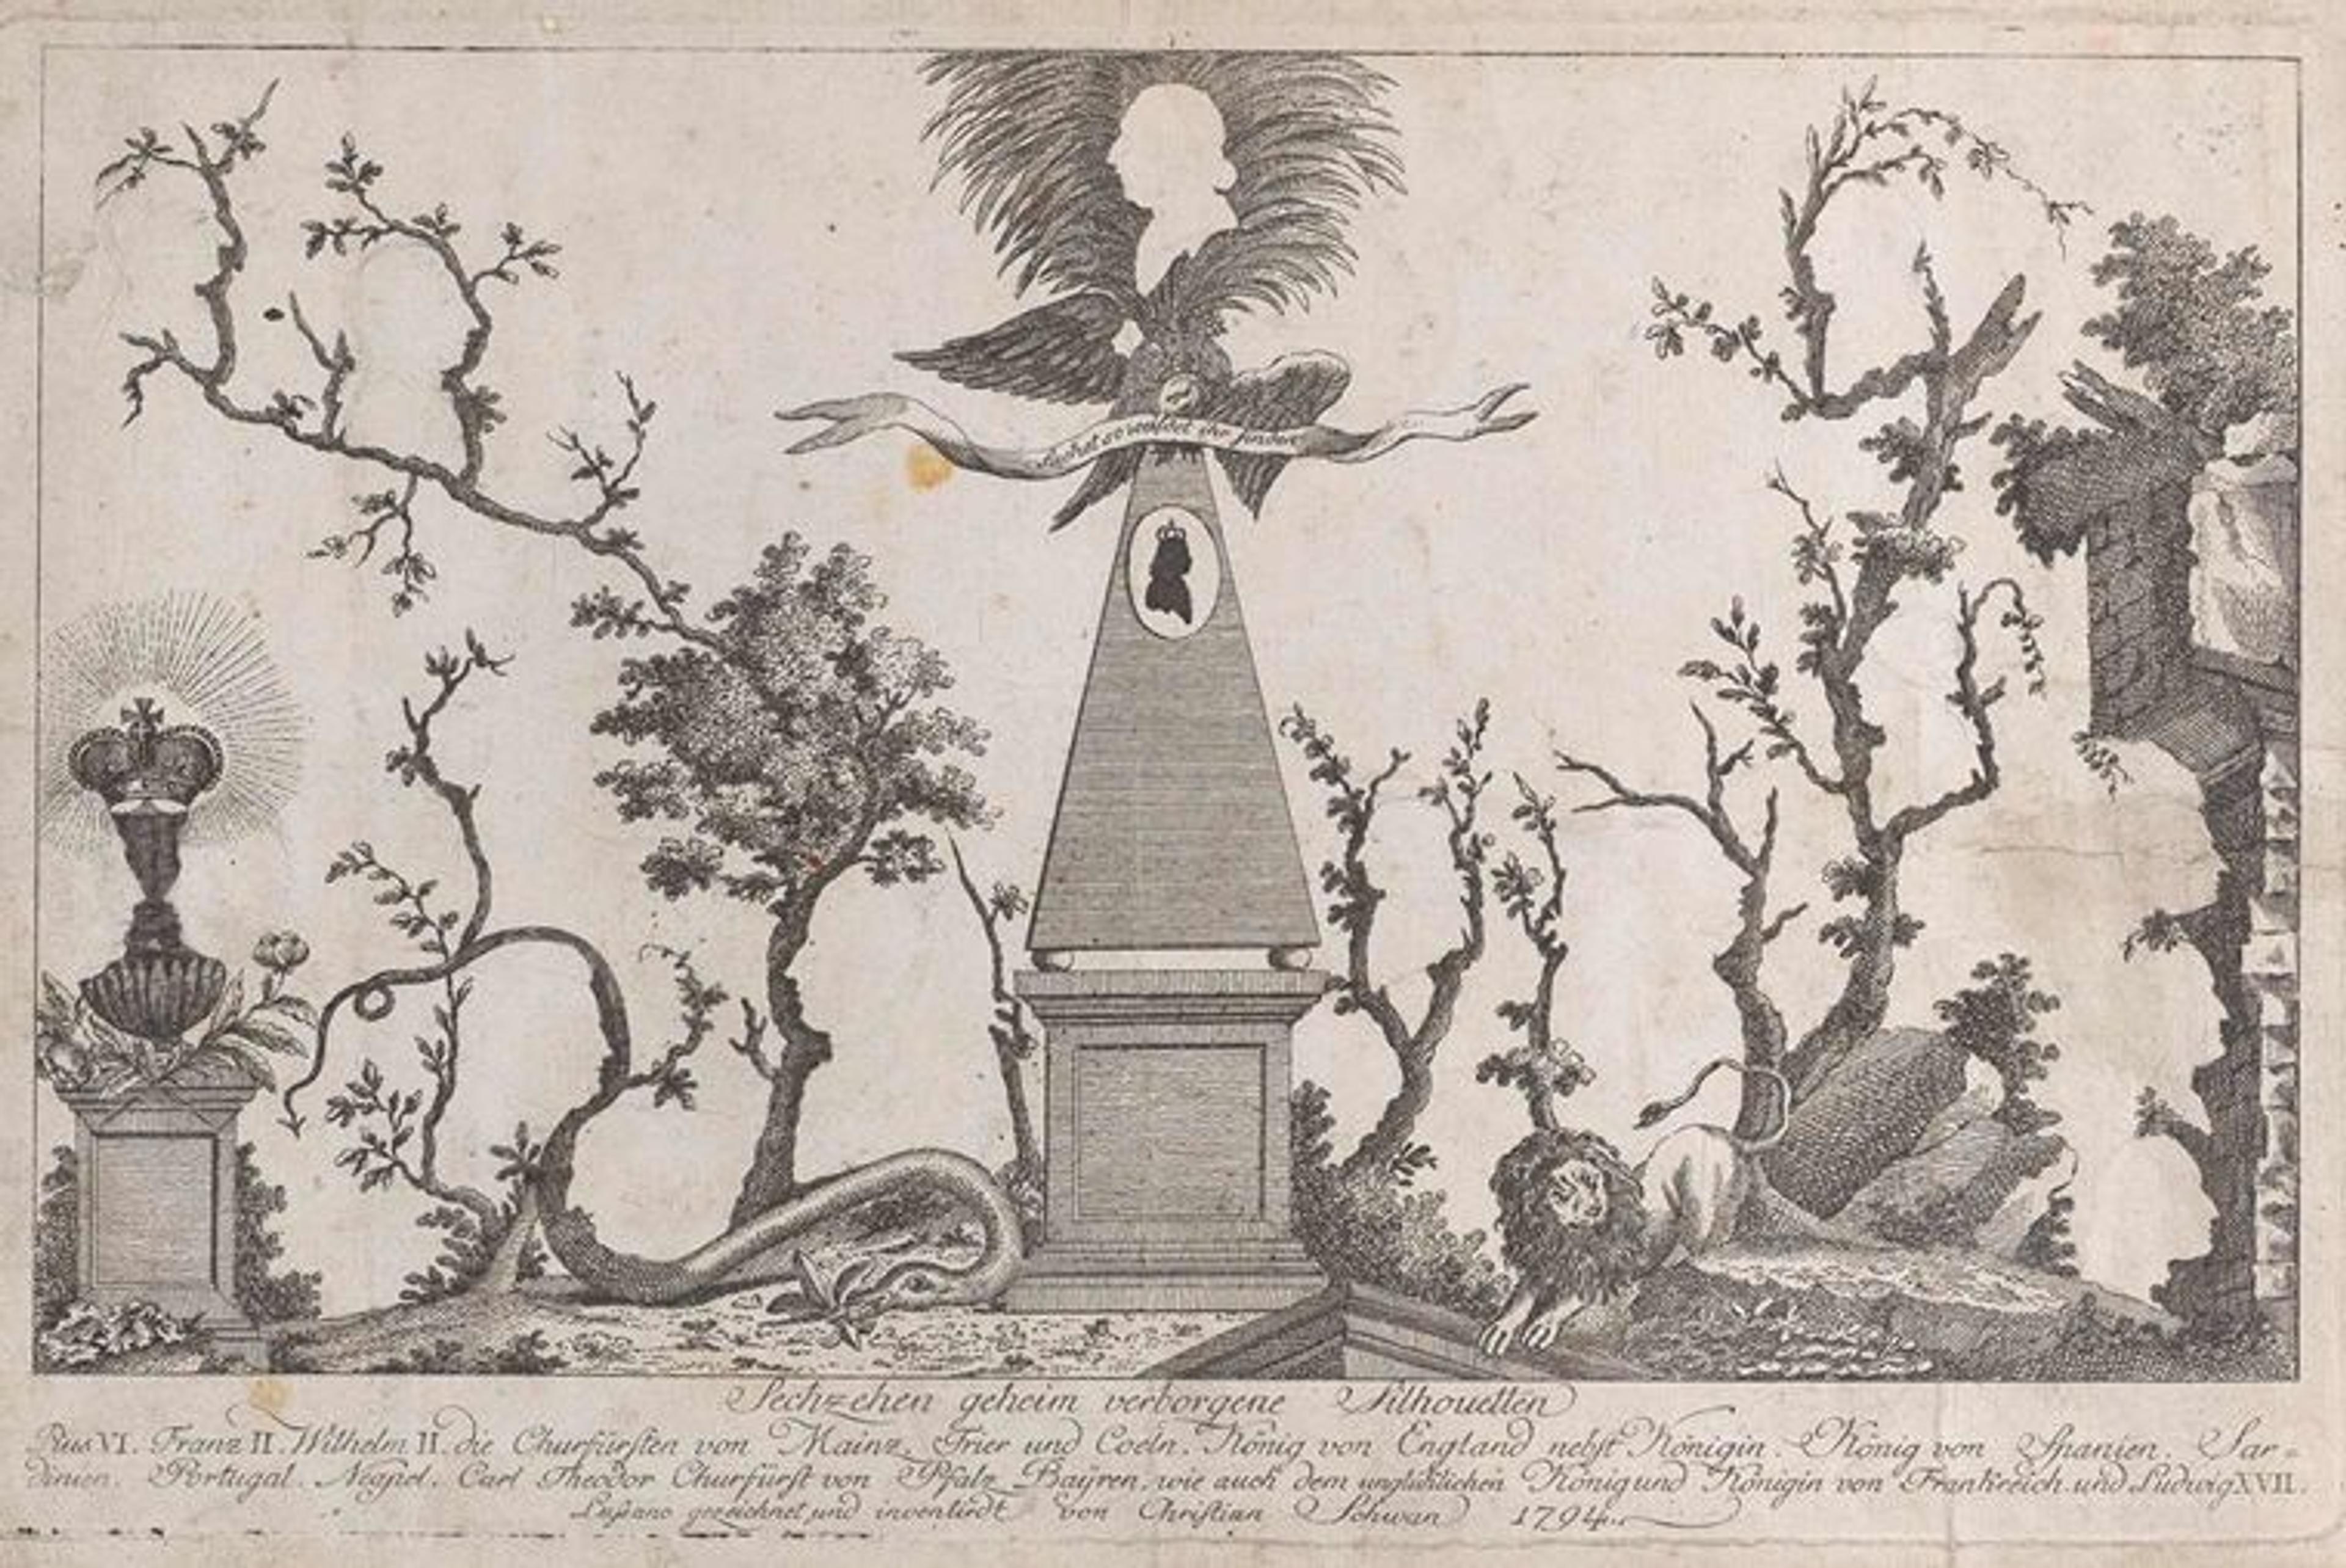 An etching of three monuments in the woods. Hidden in the image are the silhouetted profiles of famous rulers.